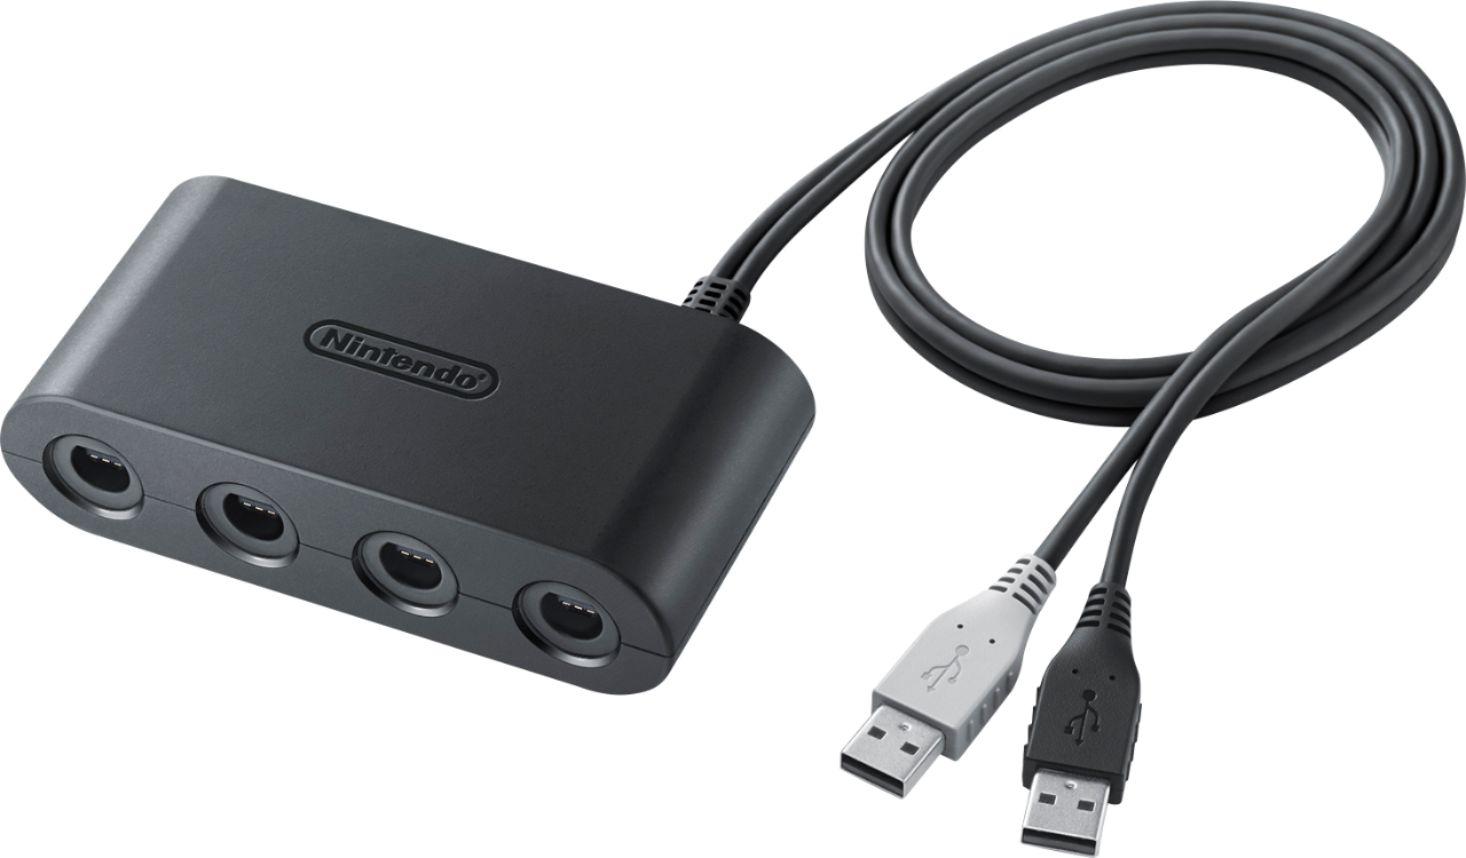 gamecube controller and adapter